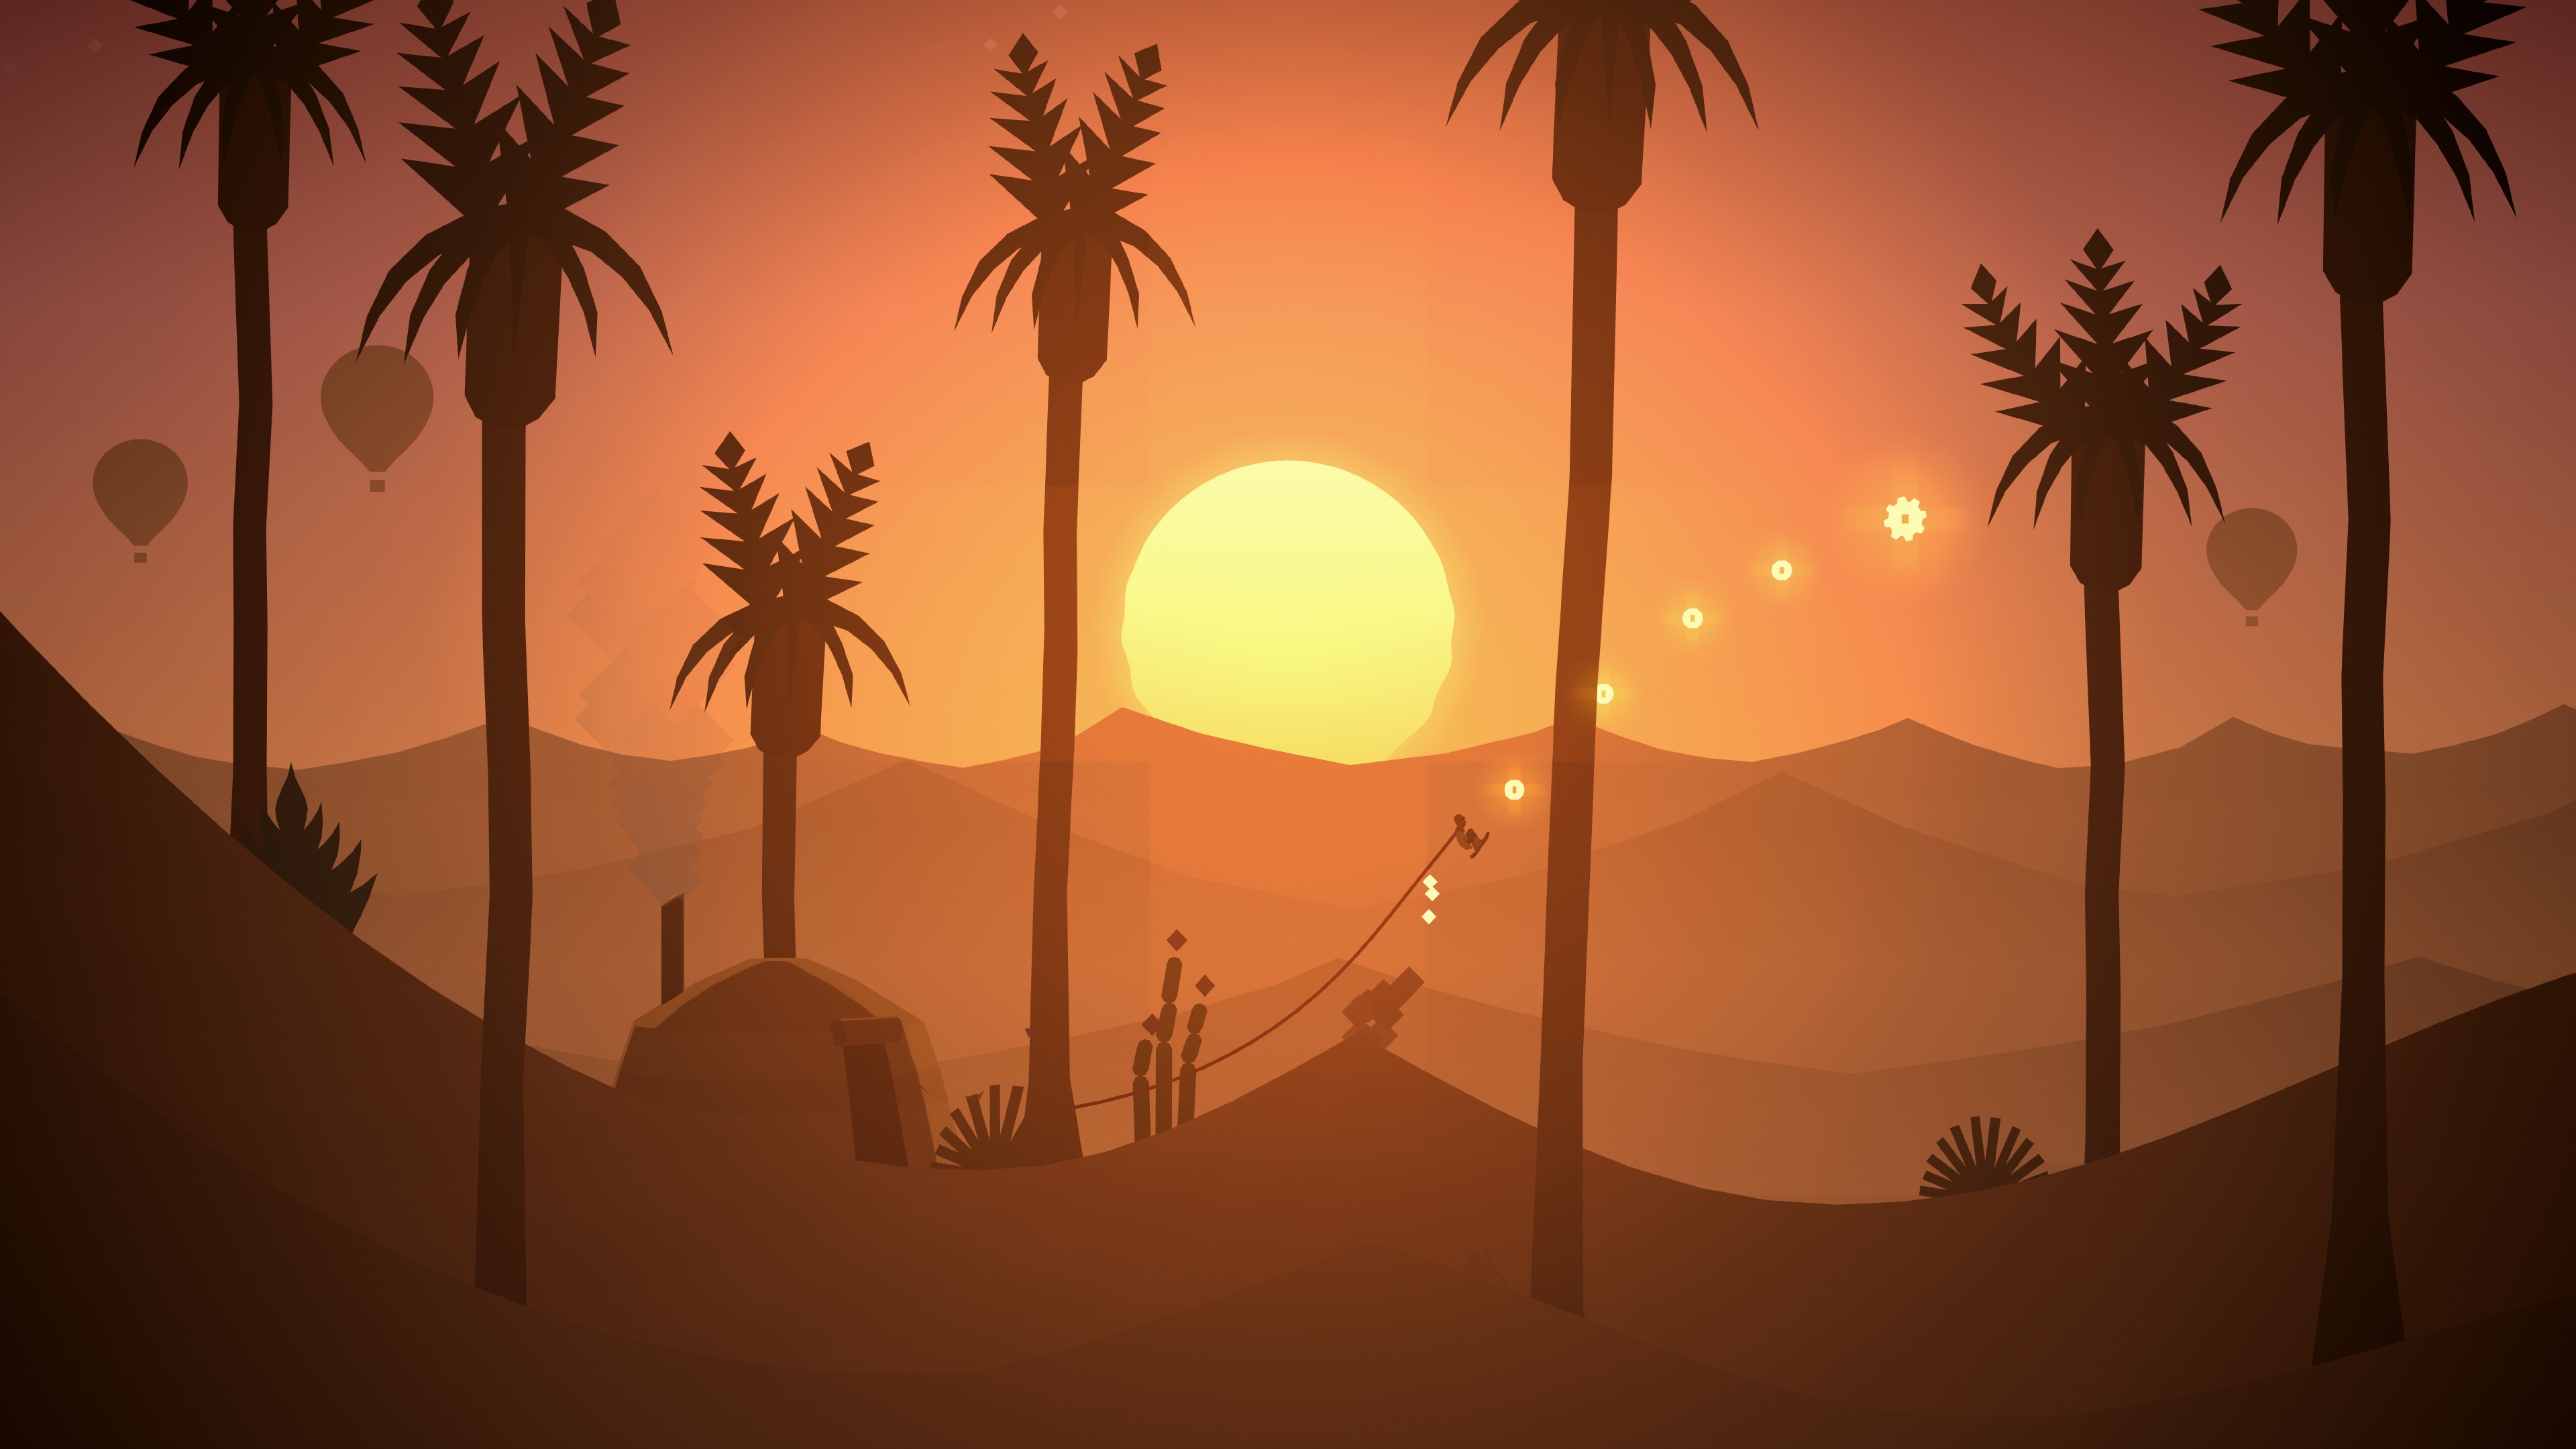 TouchArcade Game of the Week: 'Alto's Odyssey'